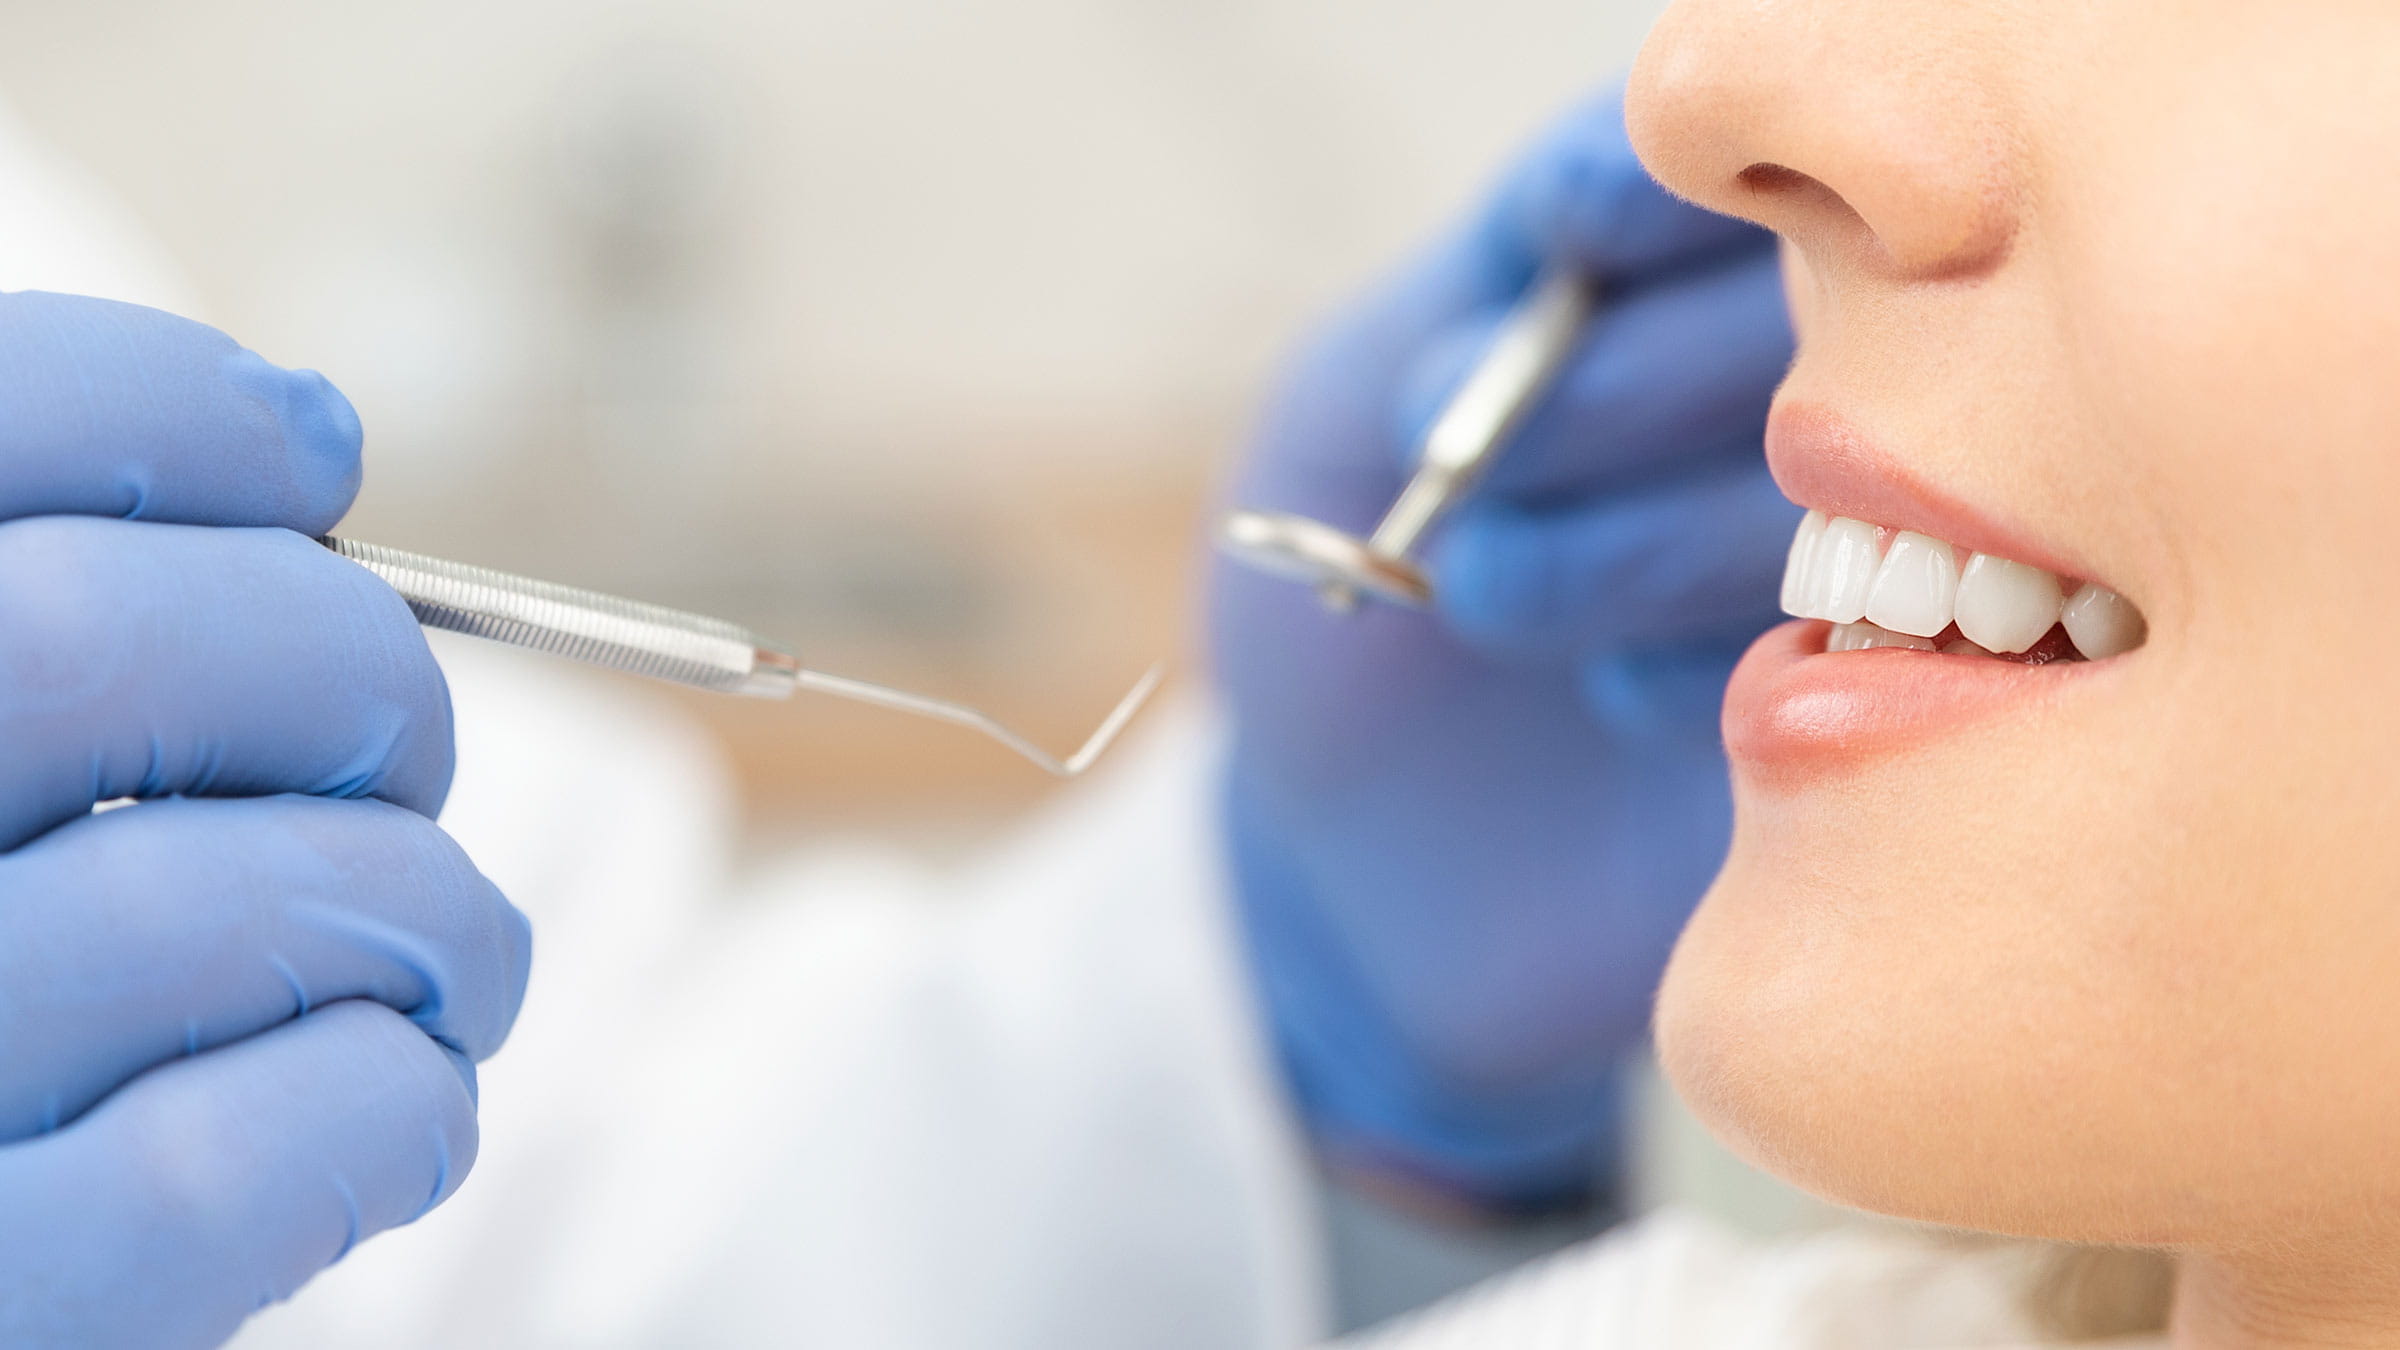 What to know about dental health after receiving a cancer diagnosis